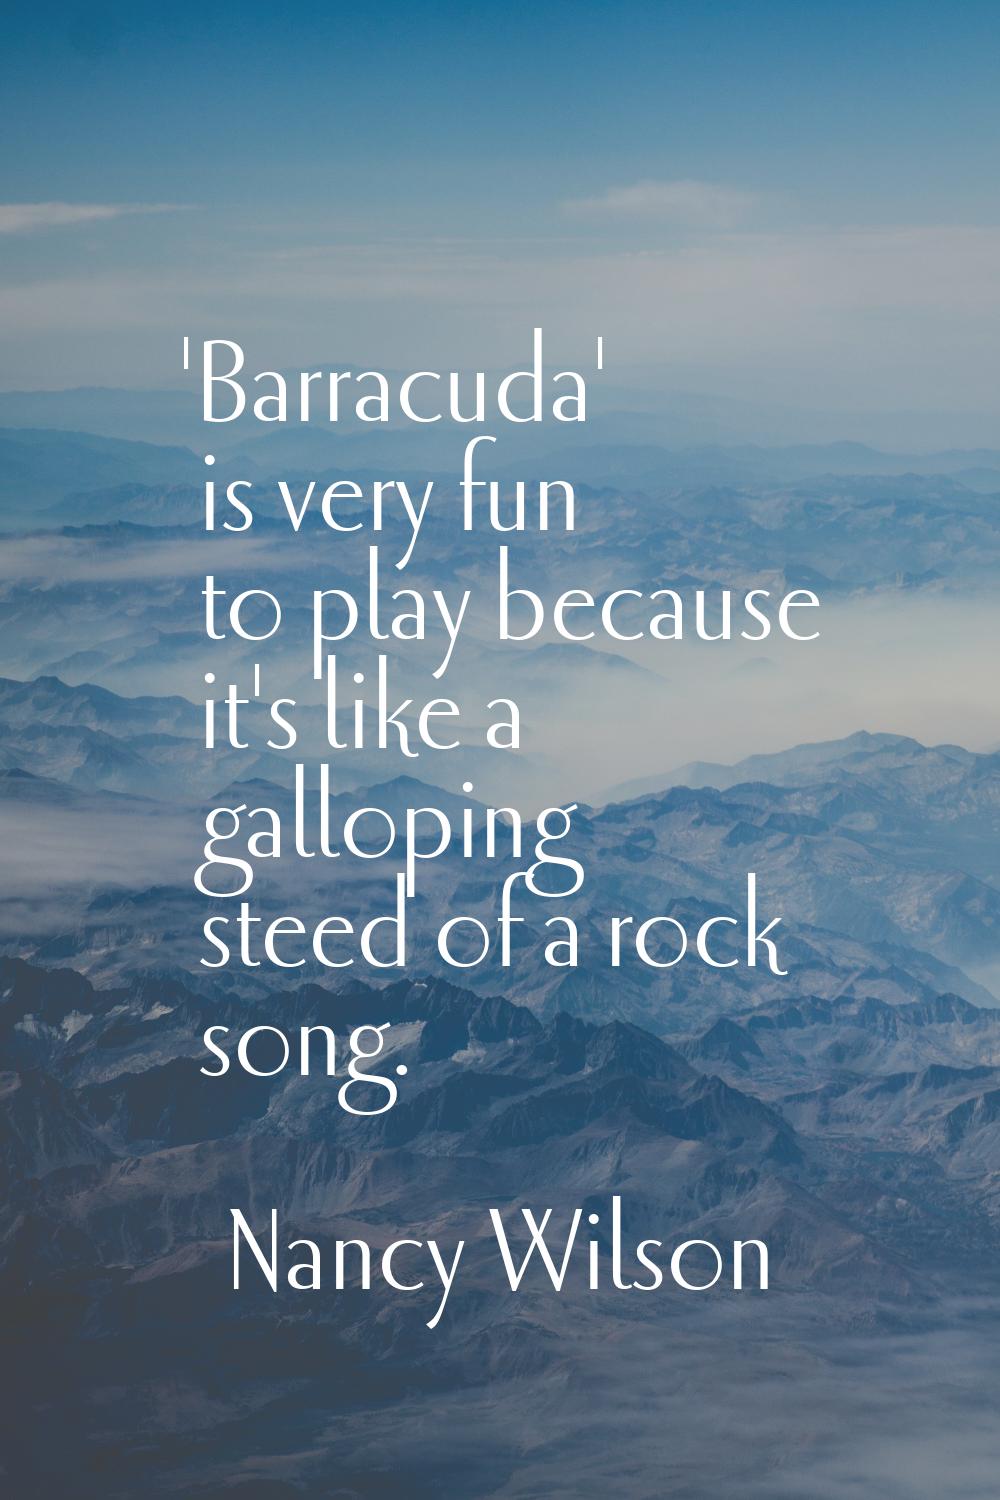 'Barracuda' is very fun to play because it's like a galloping steed of a rock song.